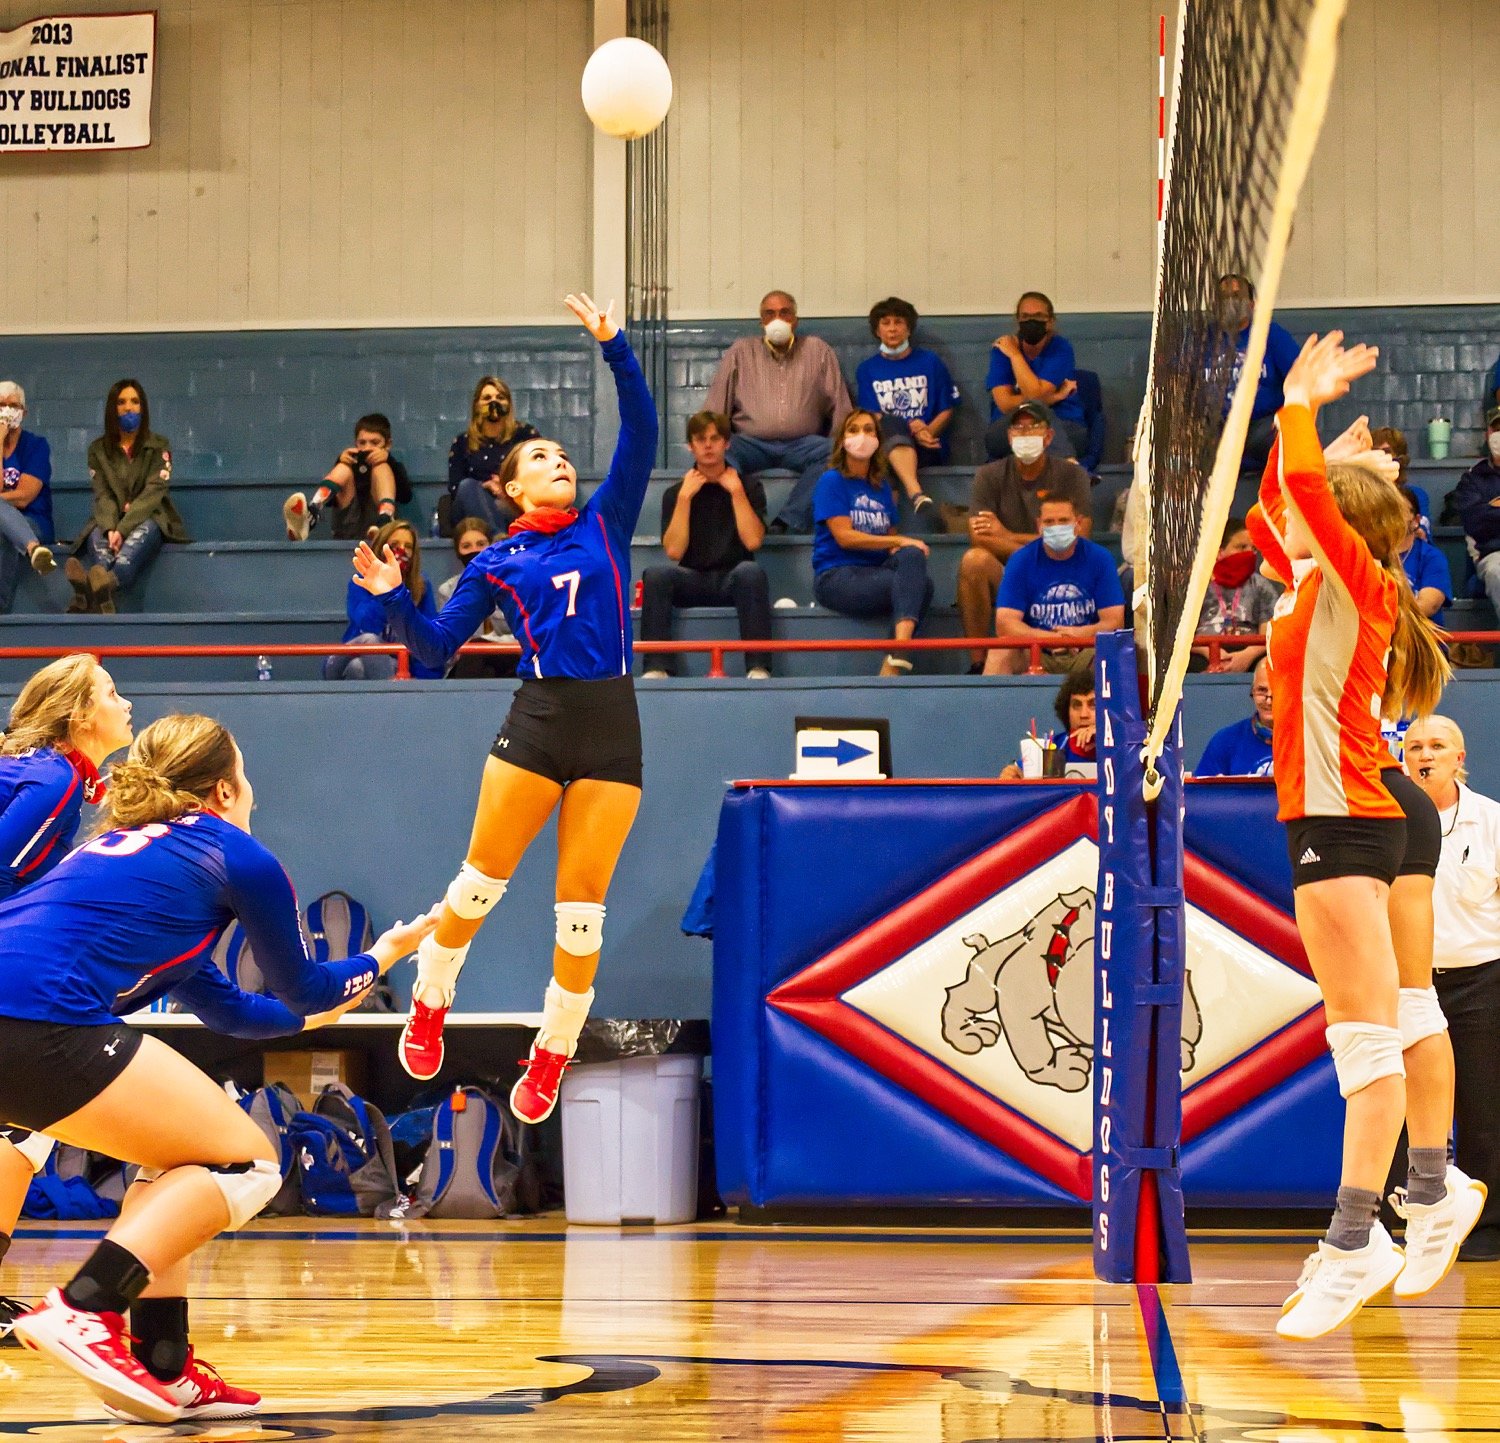 Brooklyn Marcee (7) of Quitman goes up for an effective touch shot against Mineola Friday. (Monitor photos by Sam Major)